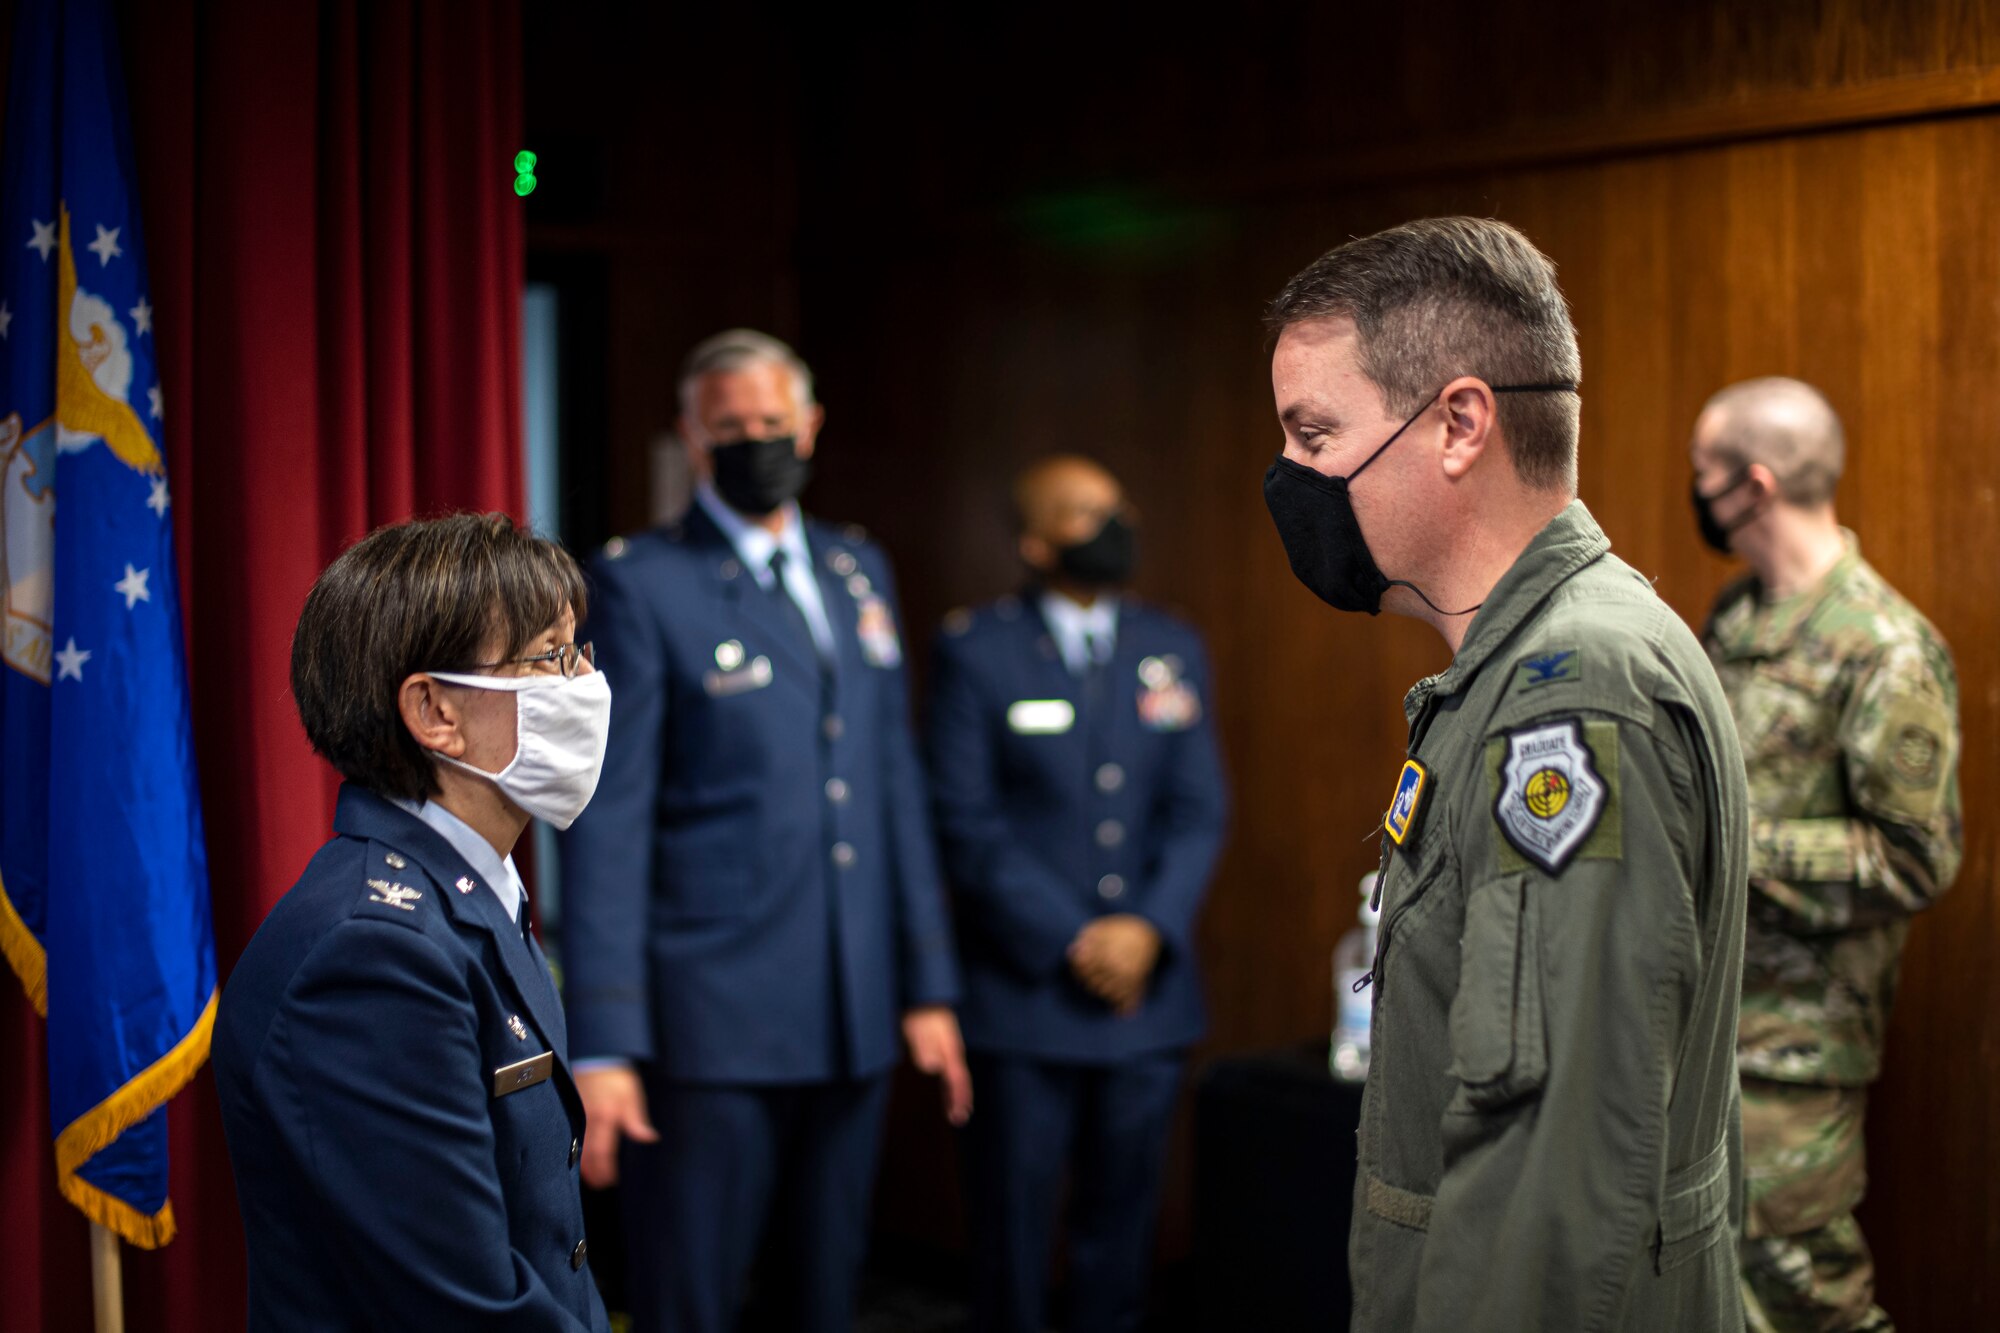 U.S. Air Force Col. Suzie Dietz, 60th Aeromedical Evacuation Squadron commander, speaks with Col. Jeffrey Nelson, 60th Air Mobility Wing commander, following an assumption of command ceremony June 9, 2020, at Travis Air Force Base, California. Dietz was formerly the 99th Inpatient Operations Squadron commander at Nellis AFB, Nevada. (U.S. Air Force photo by Senior Airman Christian Conrad)